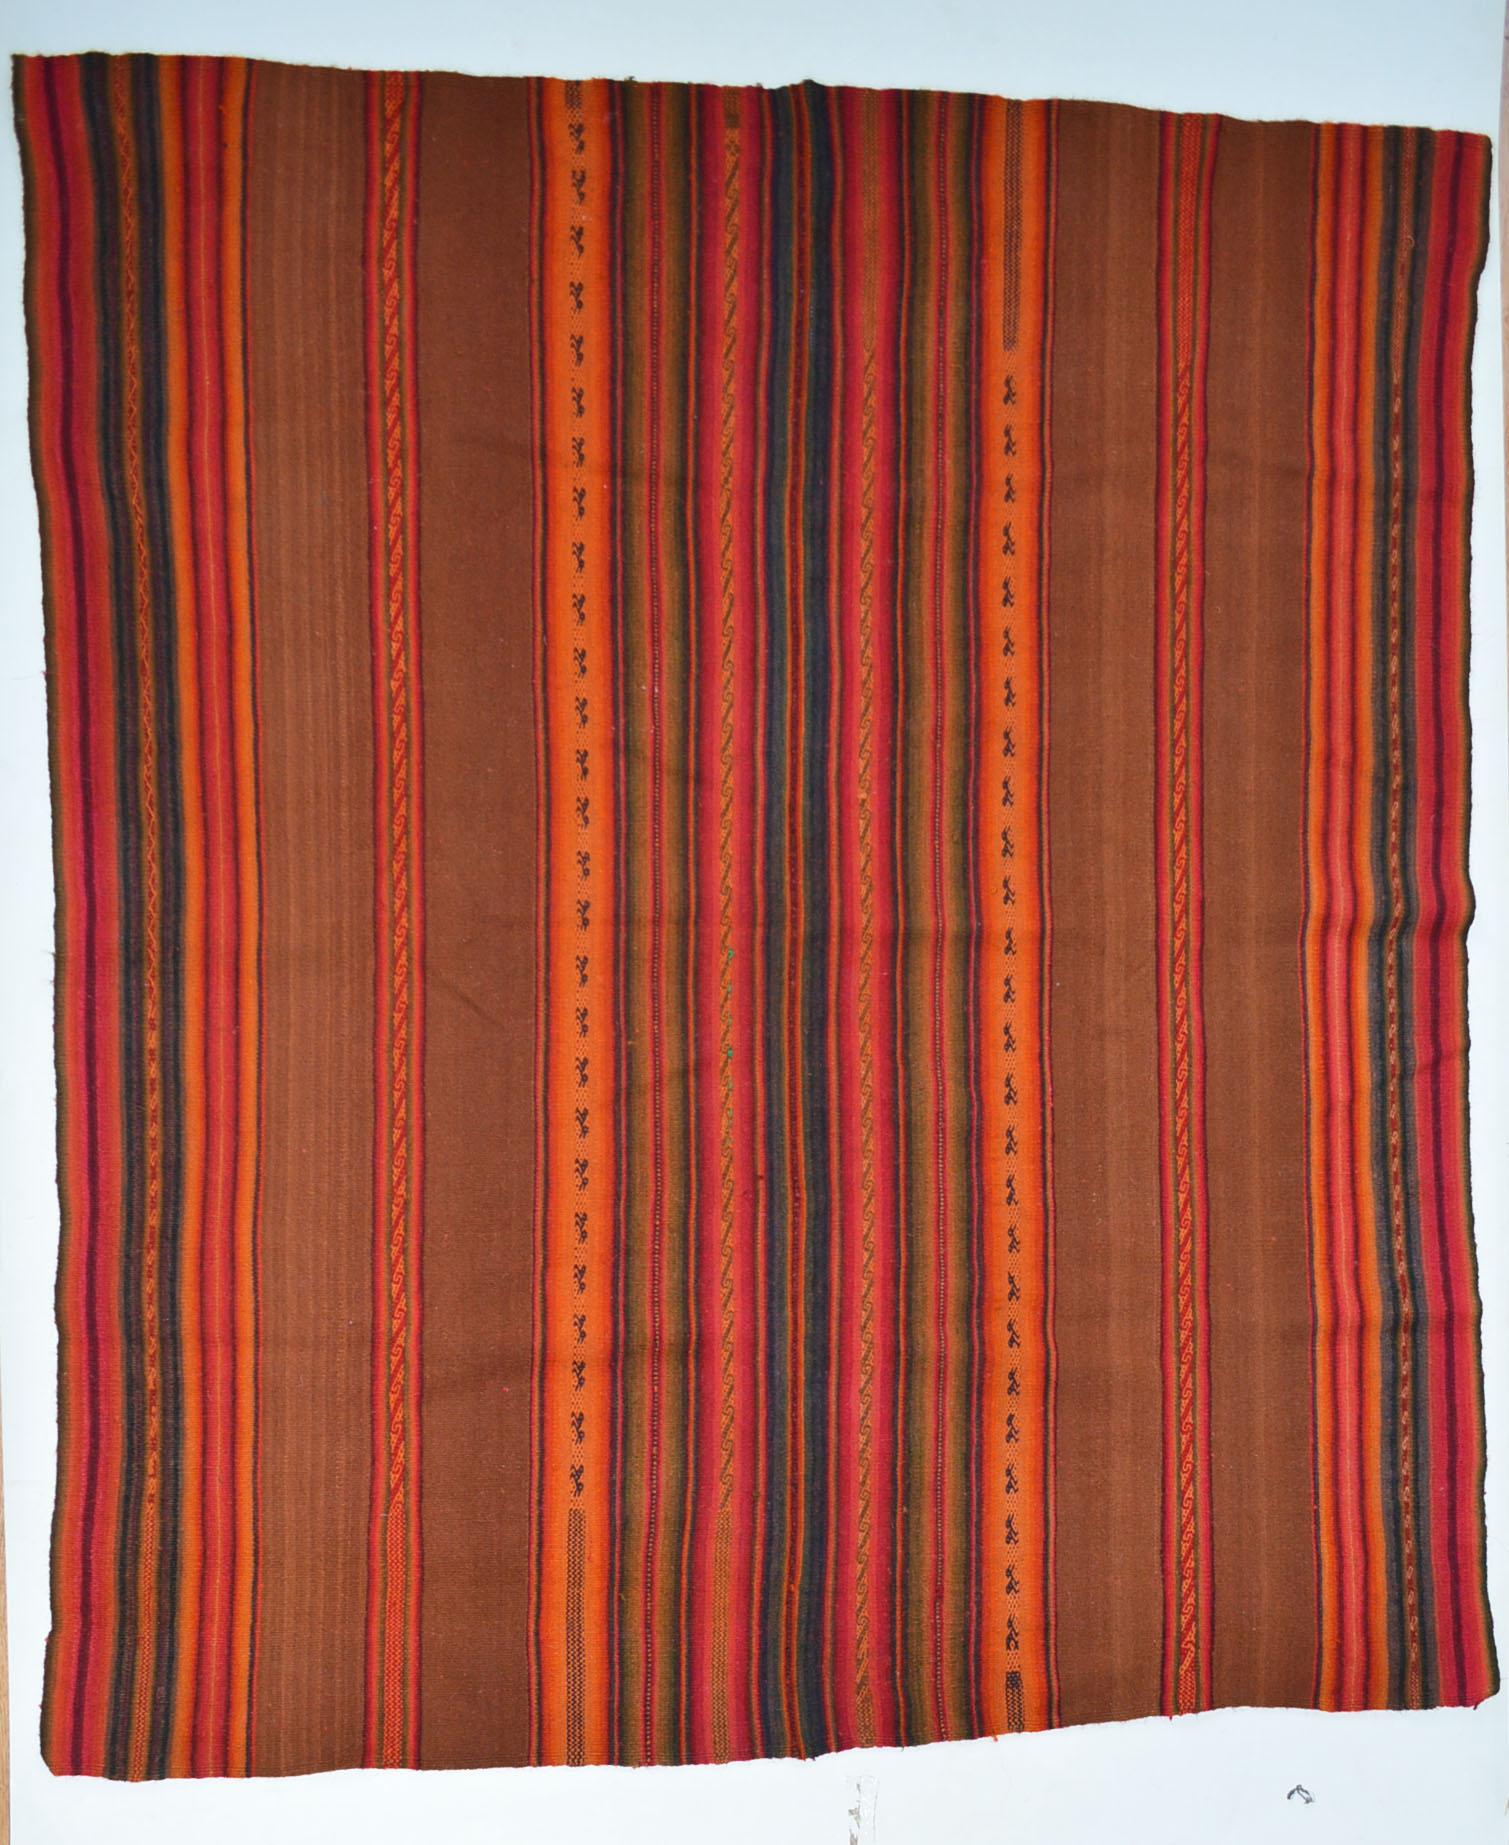 Vintage Andean Peruvian Manta Cloth South American Vintage Textiles.
A very fine Vintage Manta cloth from the High Andes region of Peru Woven in came-lid fibre (Llama wool )beautifully executed in natural dyed colors 
Fine condition, Period 1950's